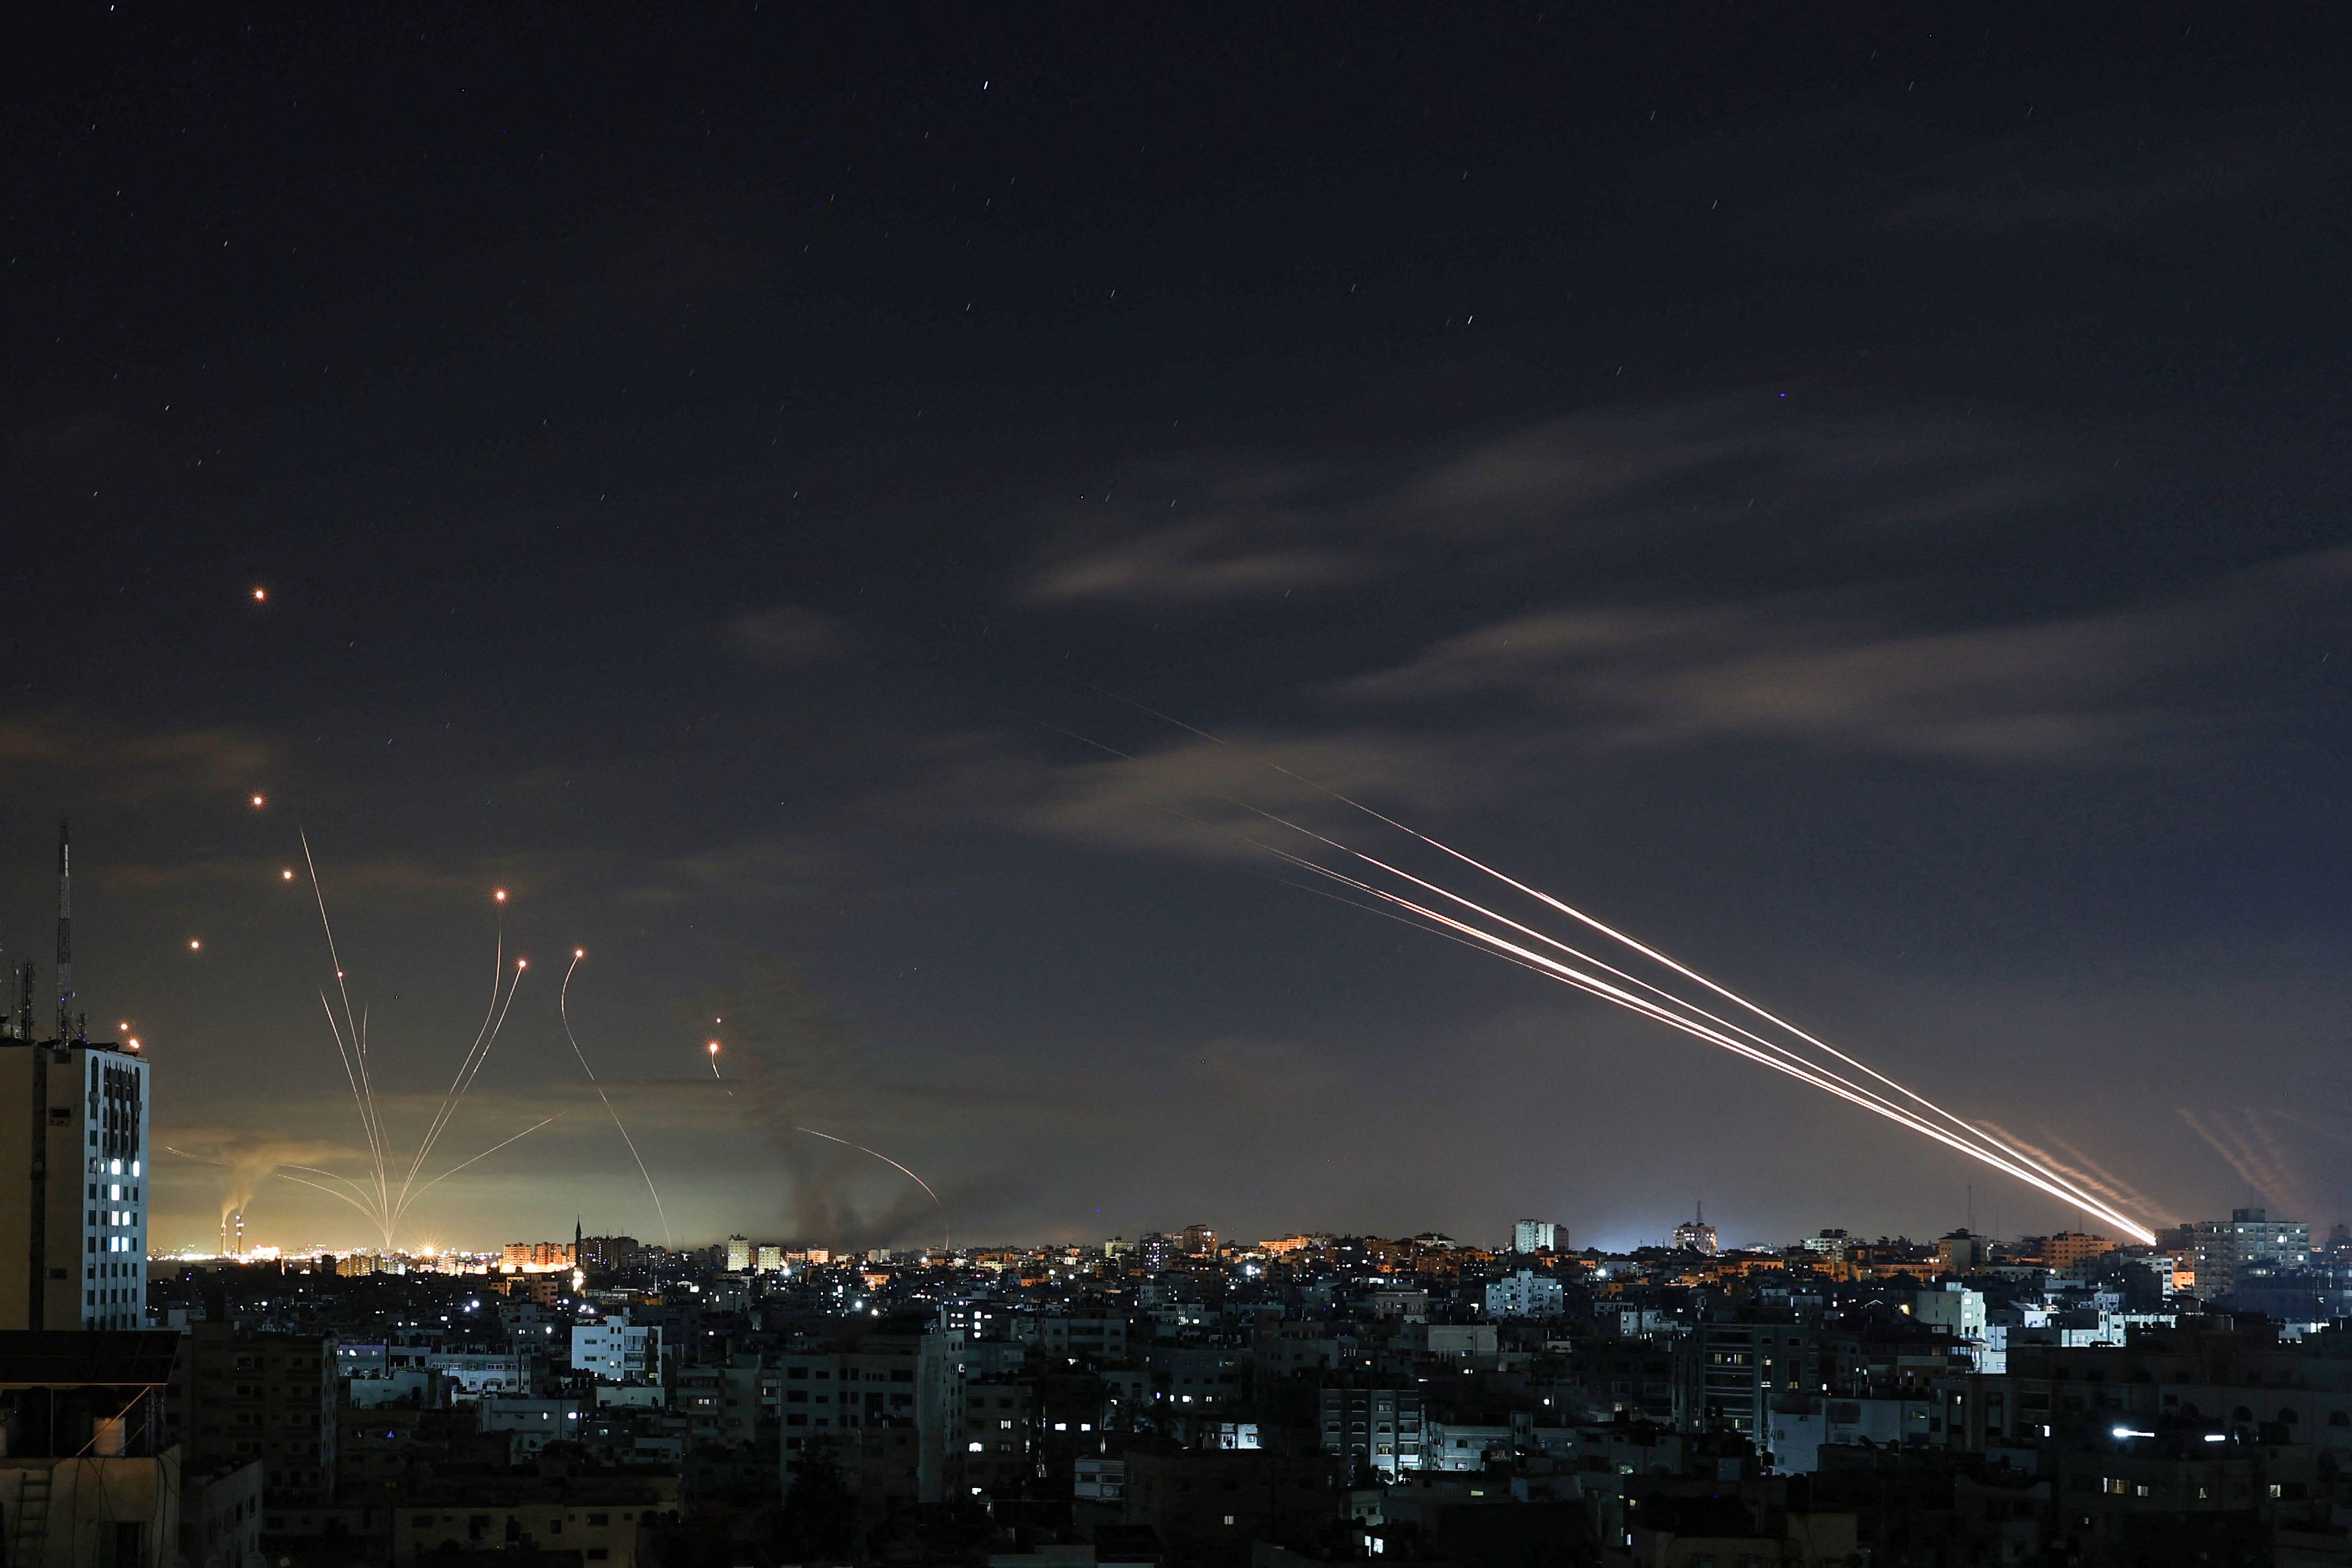  Israel's Iron Dome missile defence system (L) intercepts rockets (R) fired by the Hamas movement from Gaza city towards Israel early on May 16